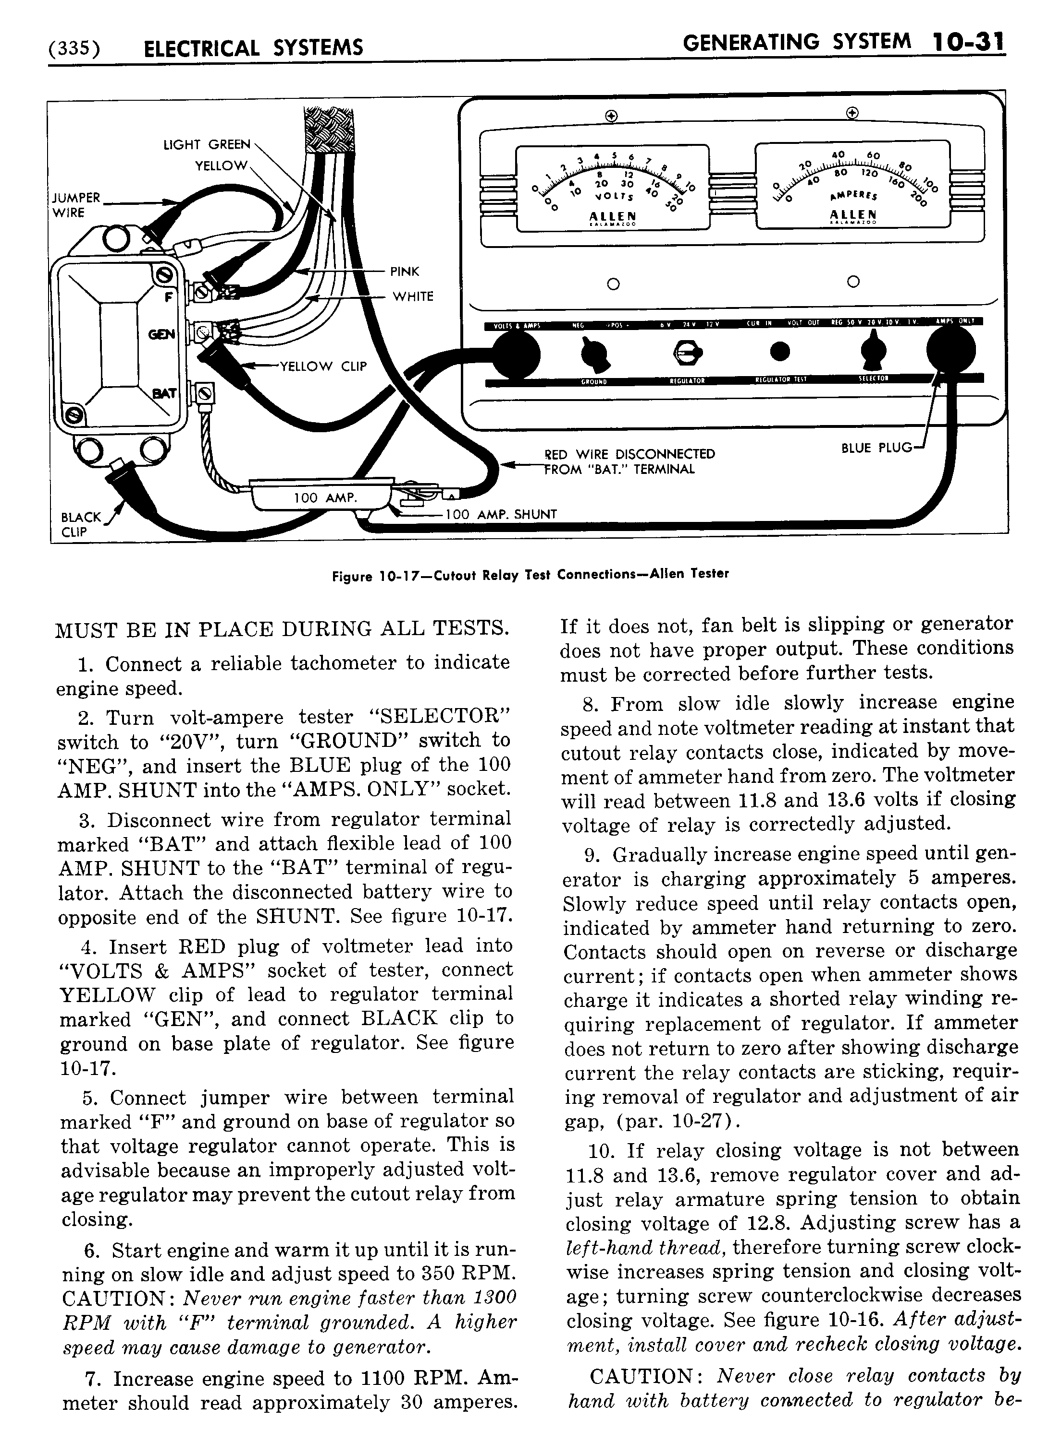 n_11 1955 Buick Shop Manual - Electrical Systems-031-031.jpg